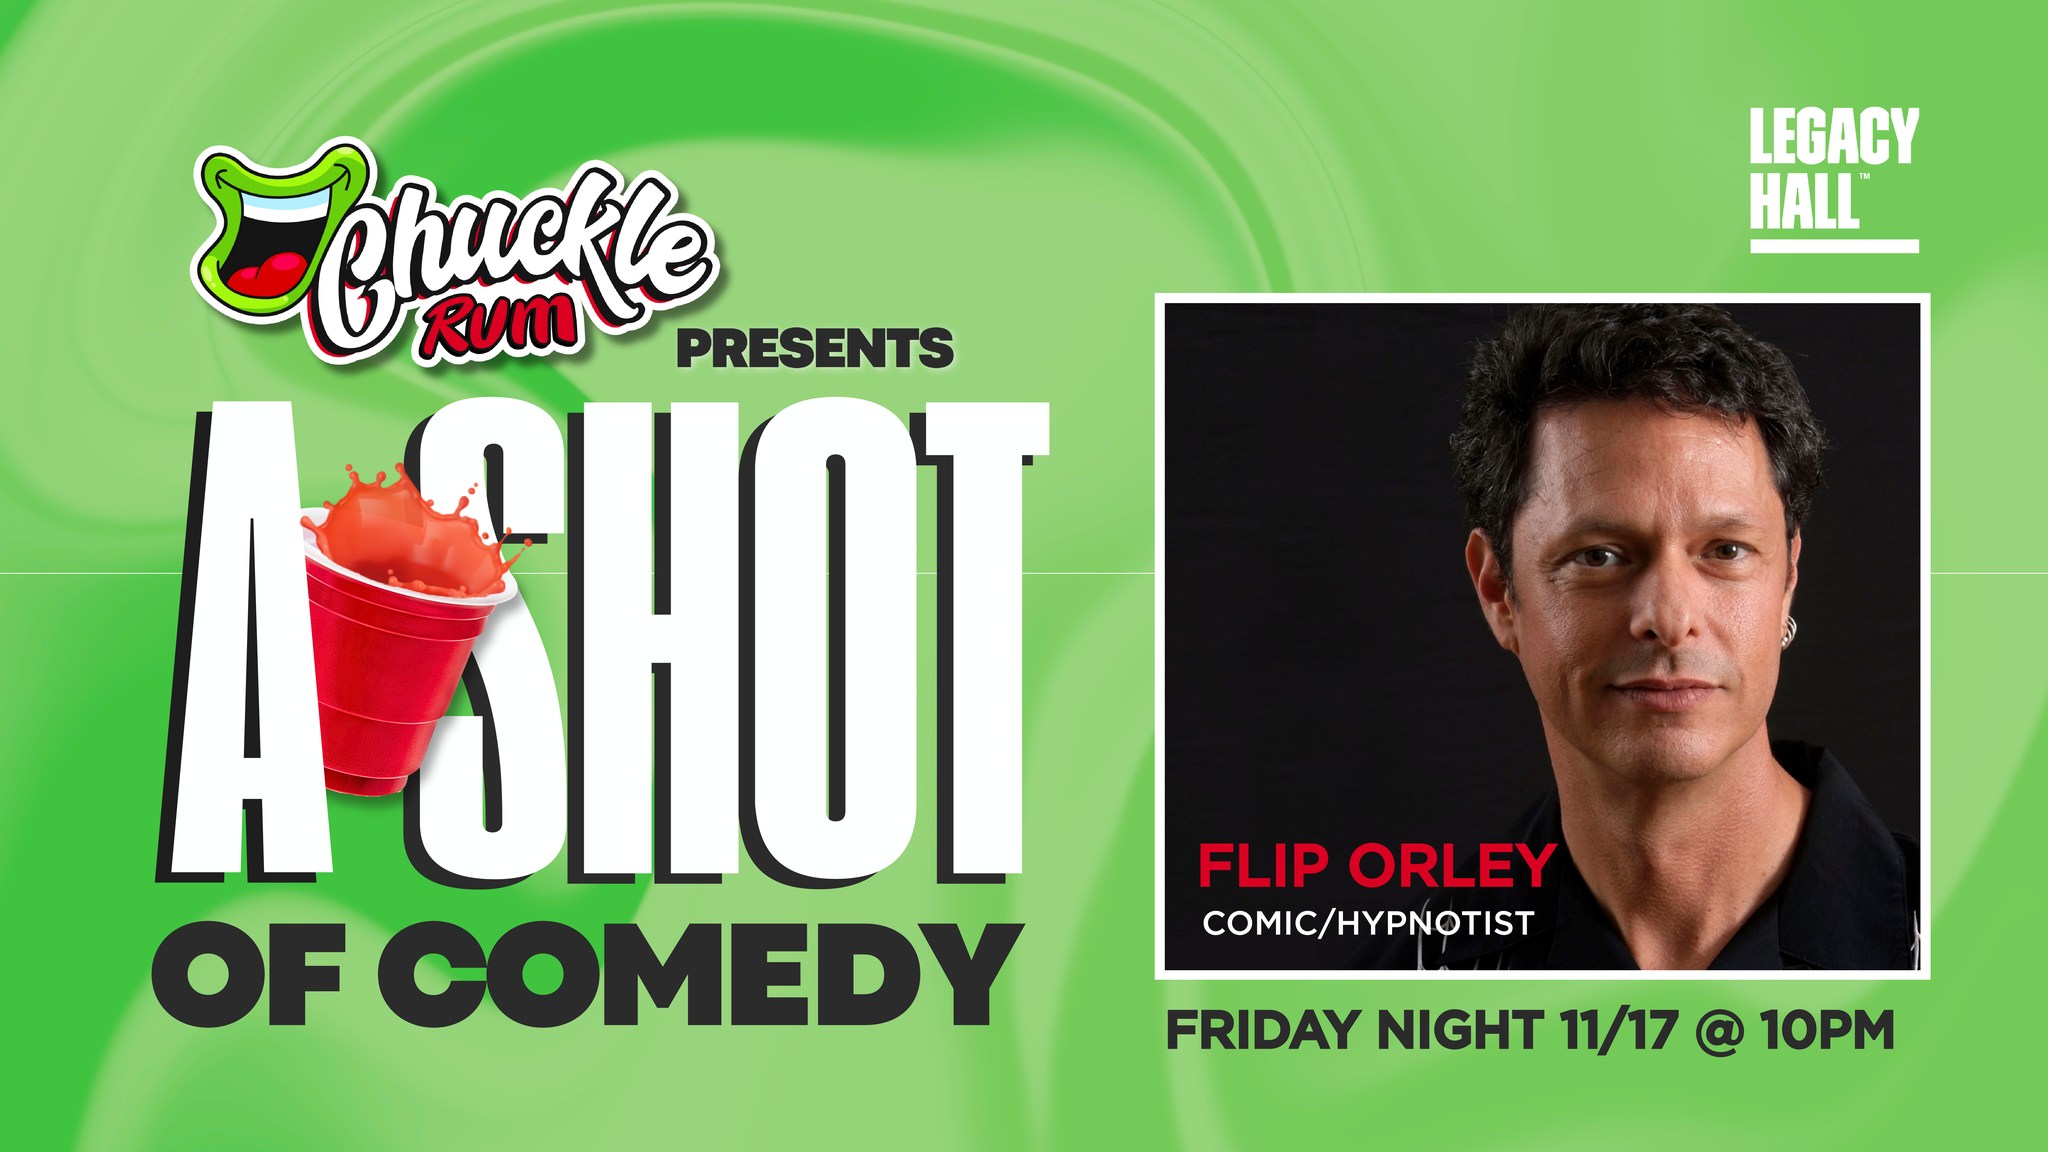 Chuckle Rum presents: A Shot of Comedy with Comic/Hypnotist Flip Orley